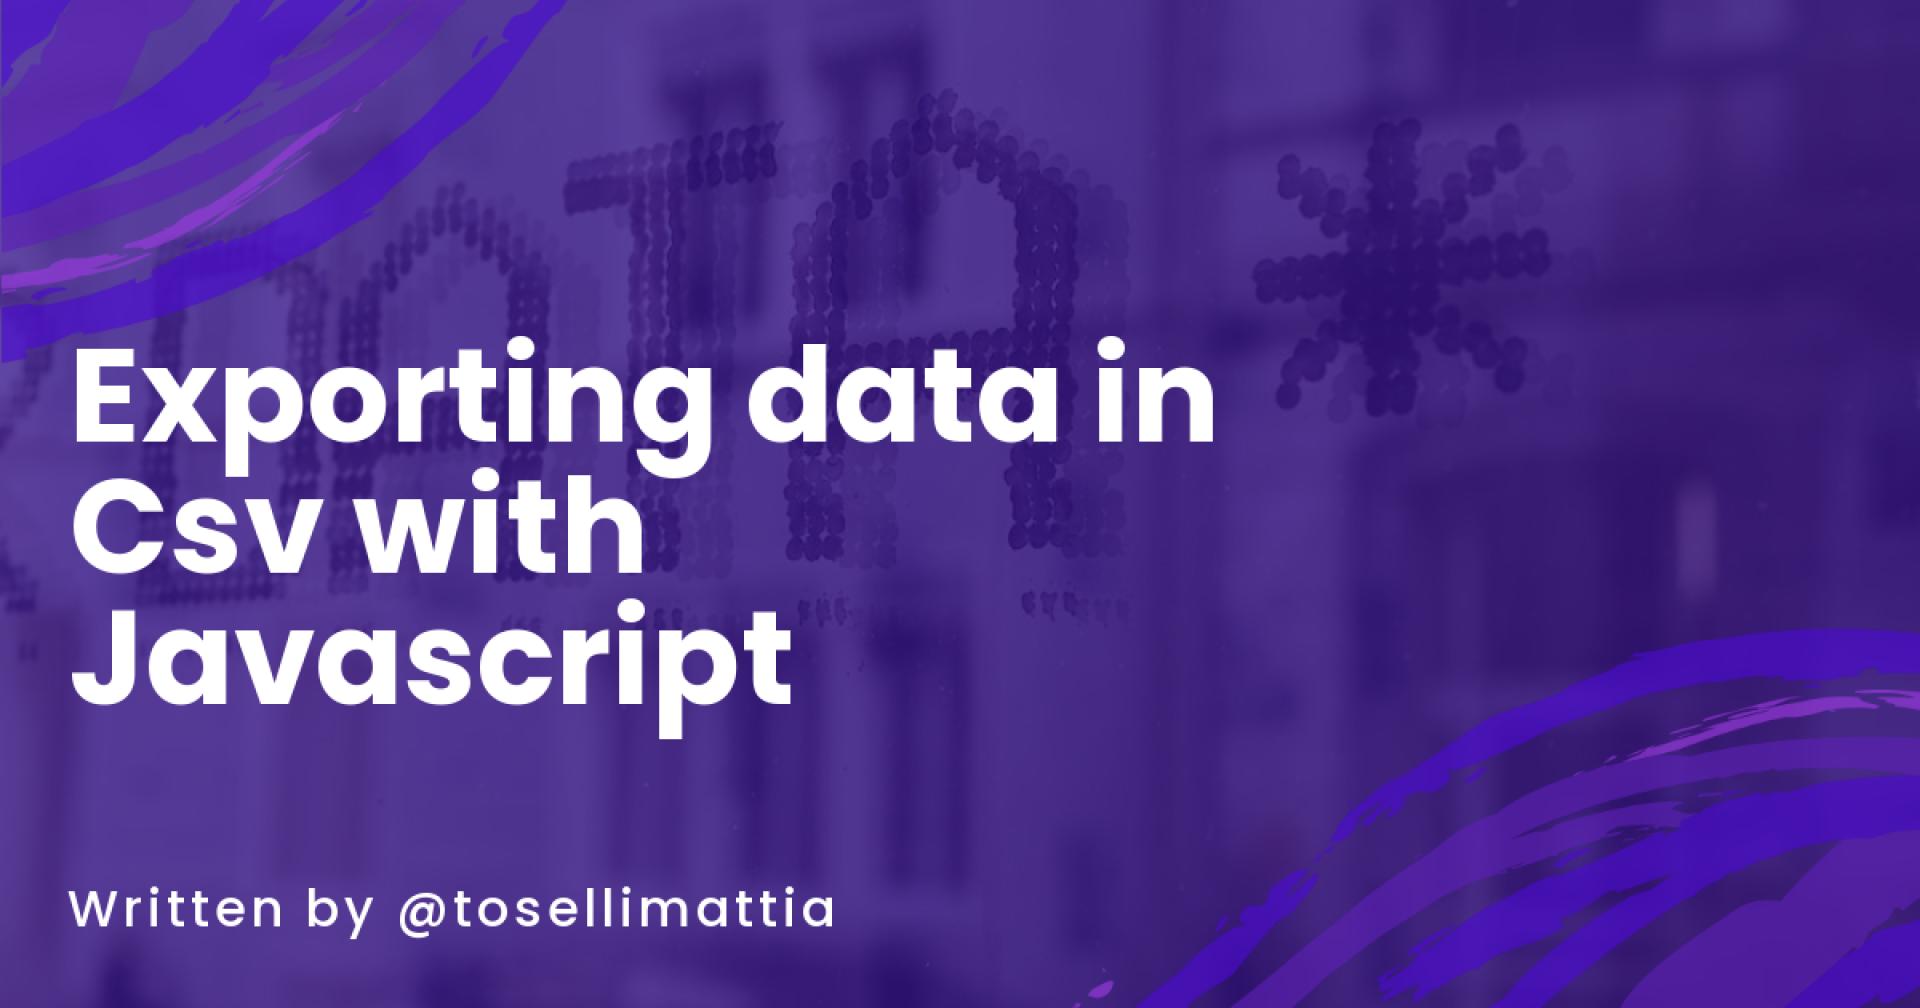 Exporting data in Csv with Javascript